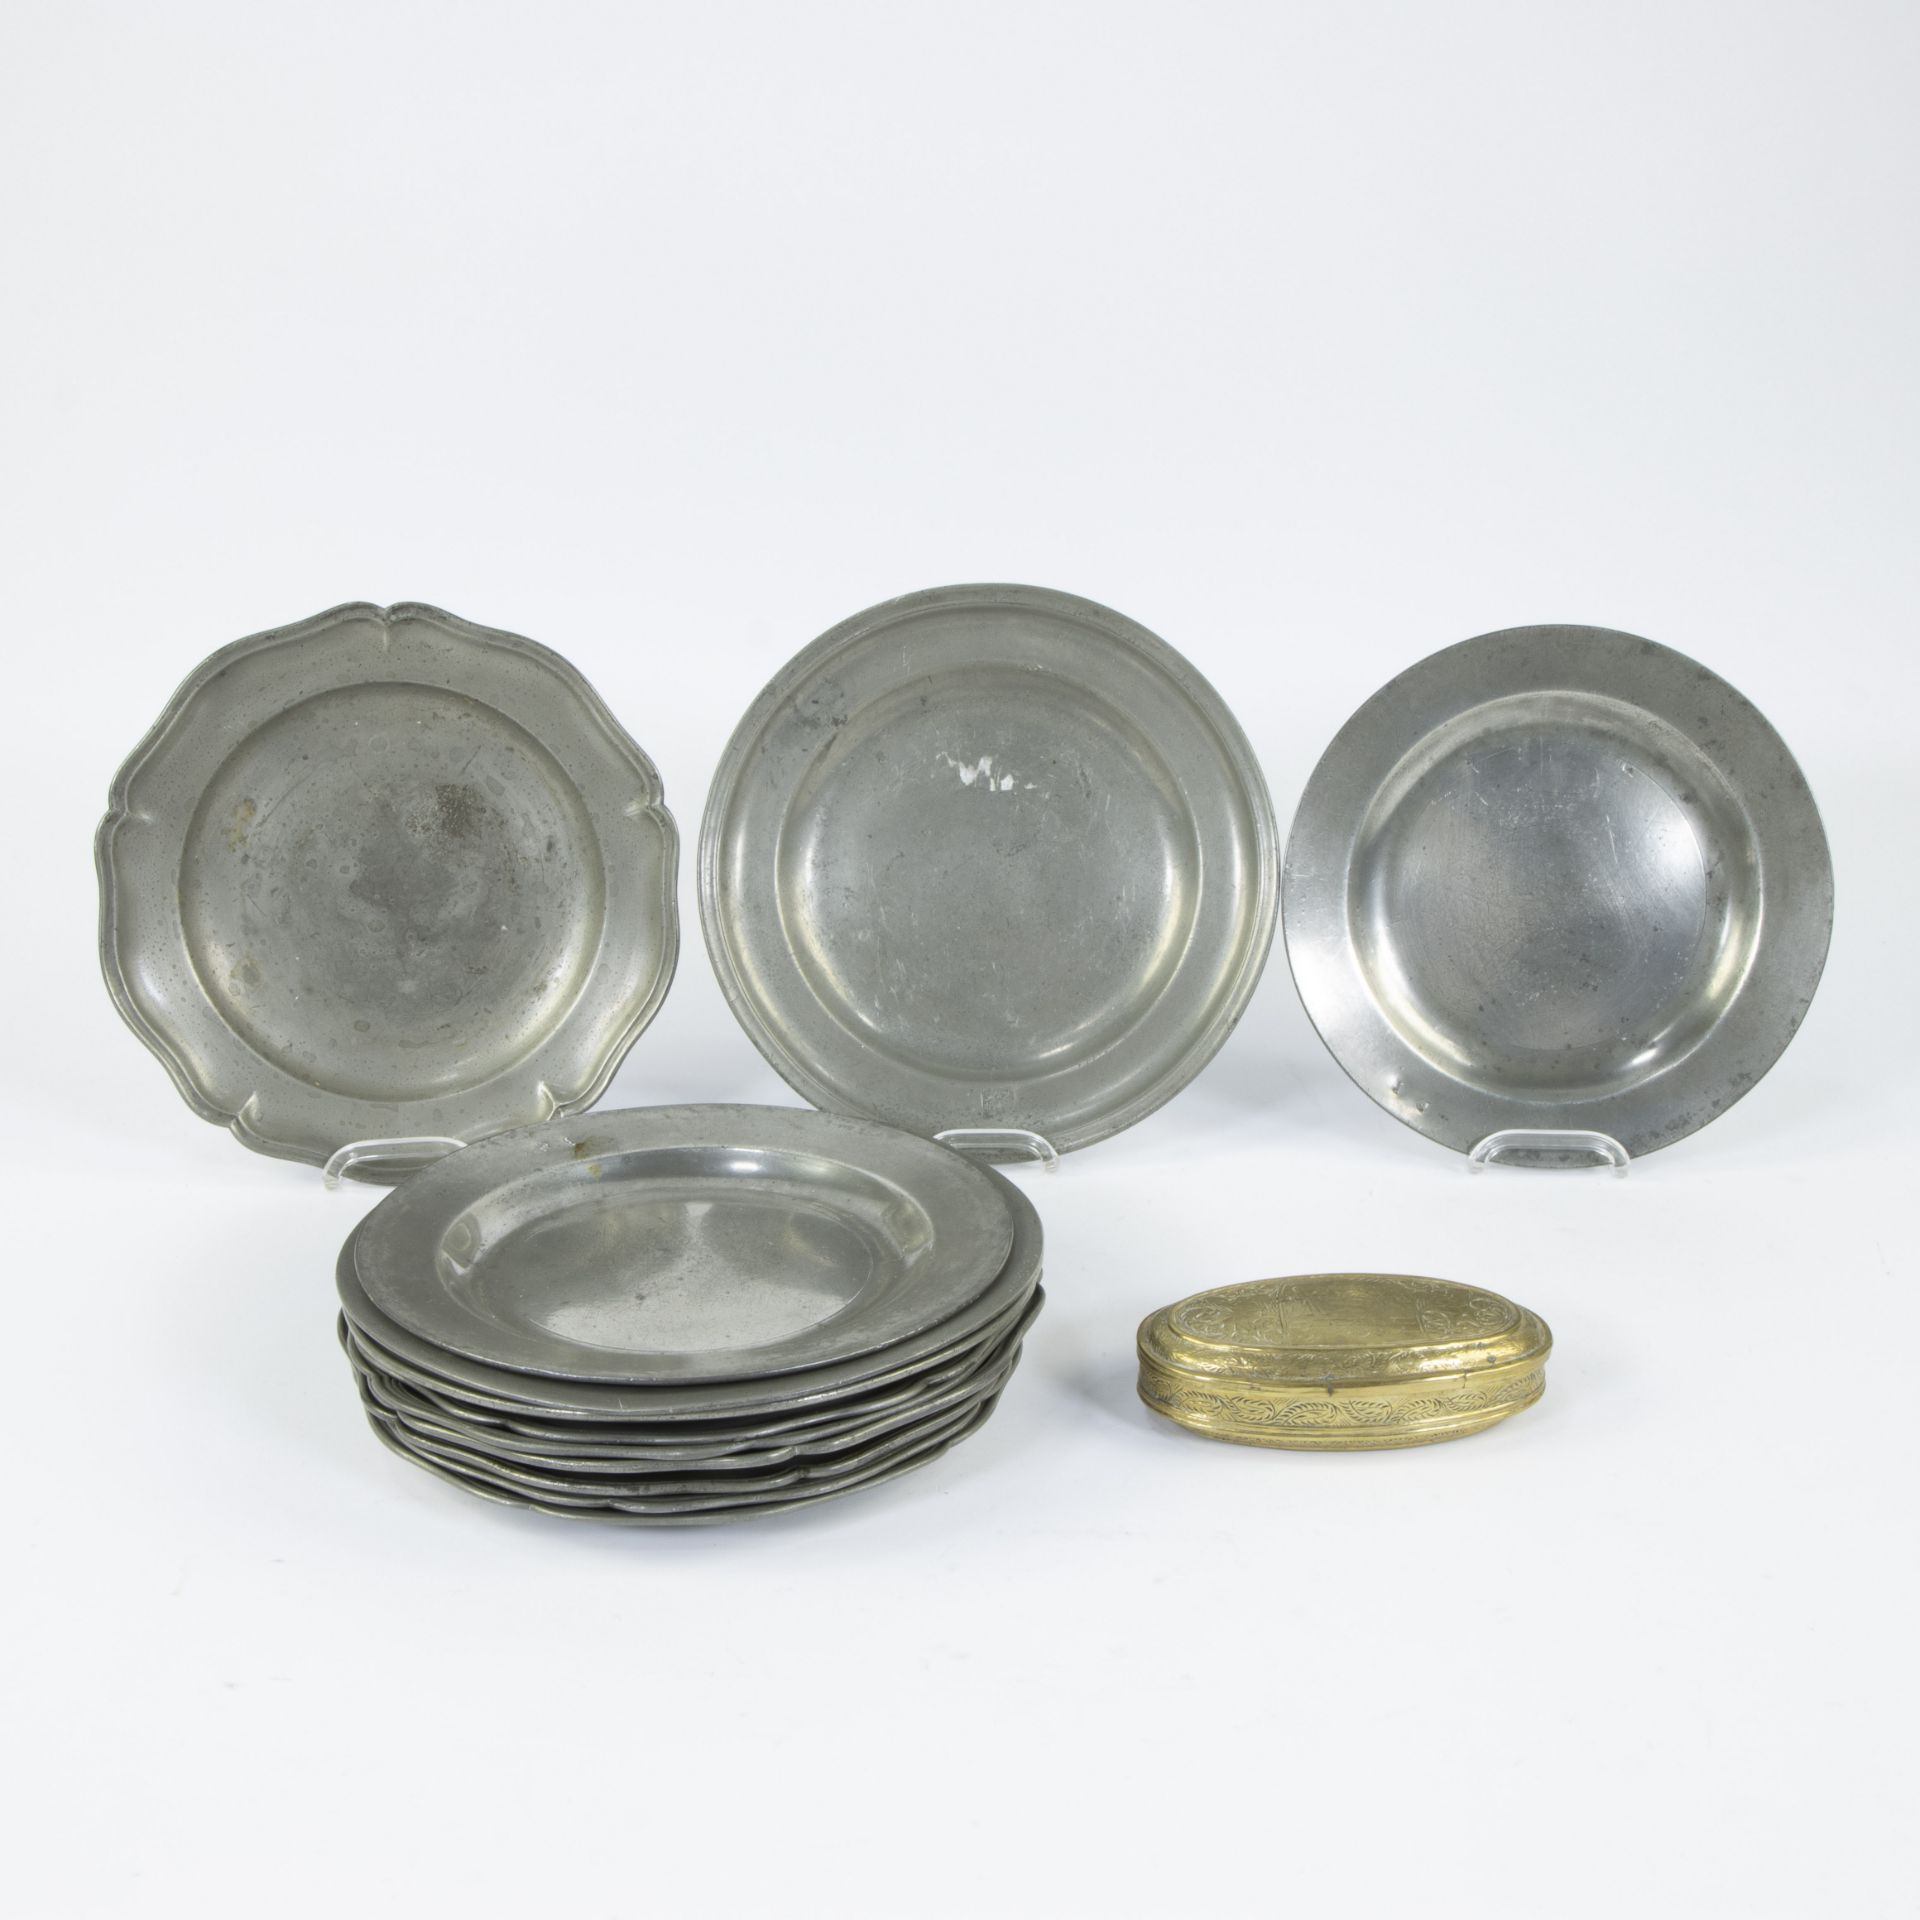 12 pewter plates and gilt tobacco box